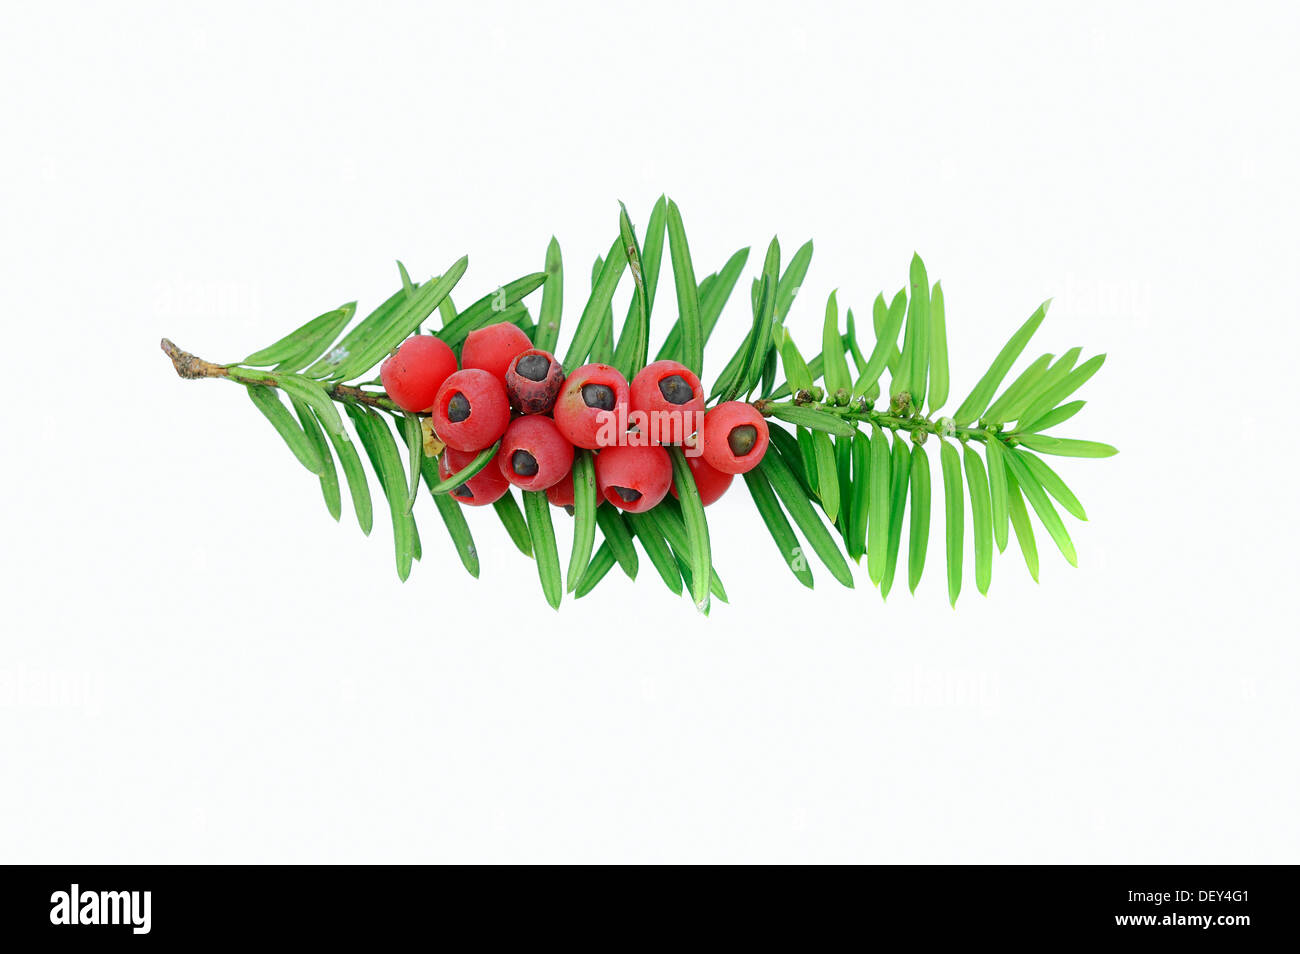 Yew (Taxus baccata), twig with berries, poisonous plant, North Rhine-Westphalia Stock Photo